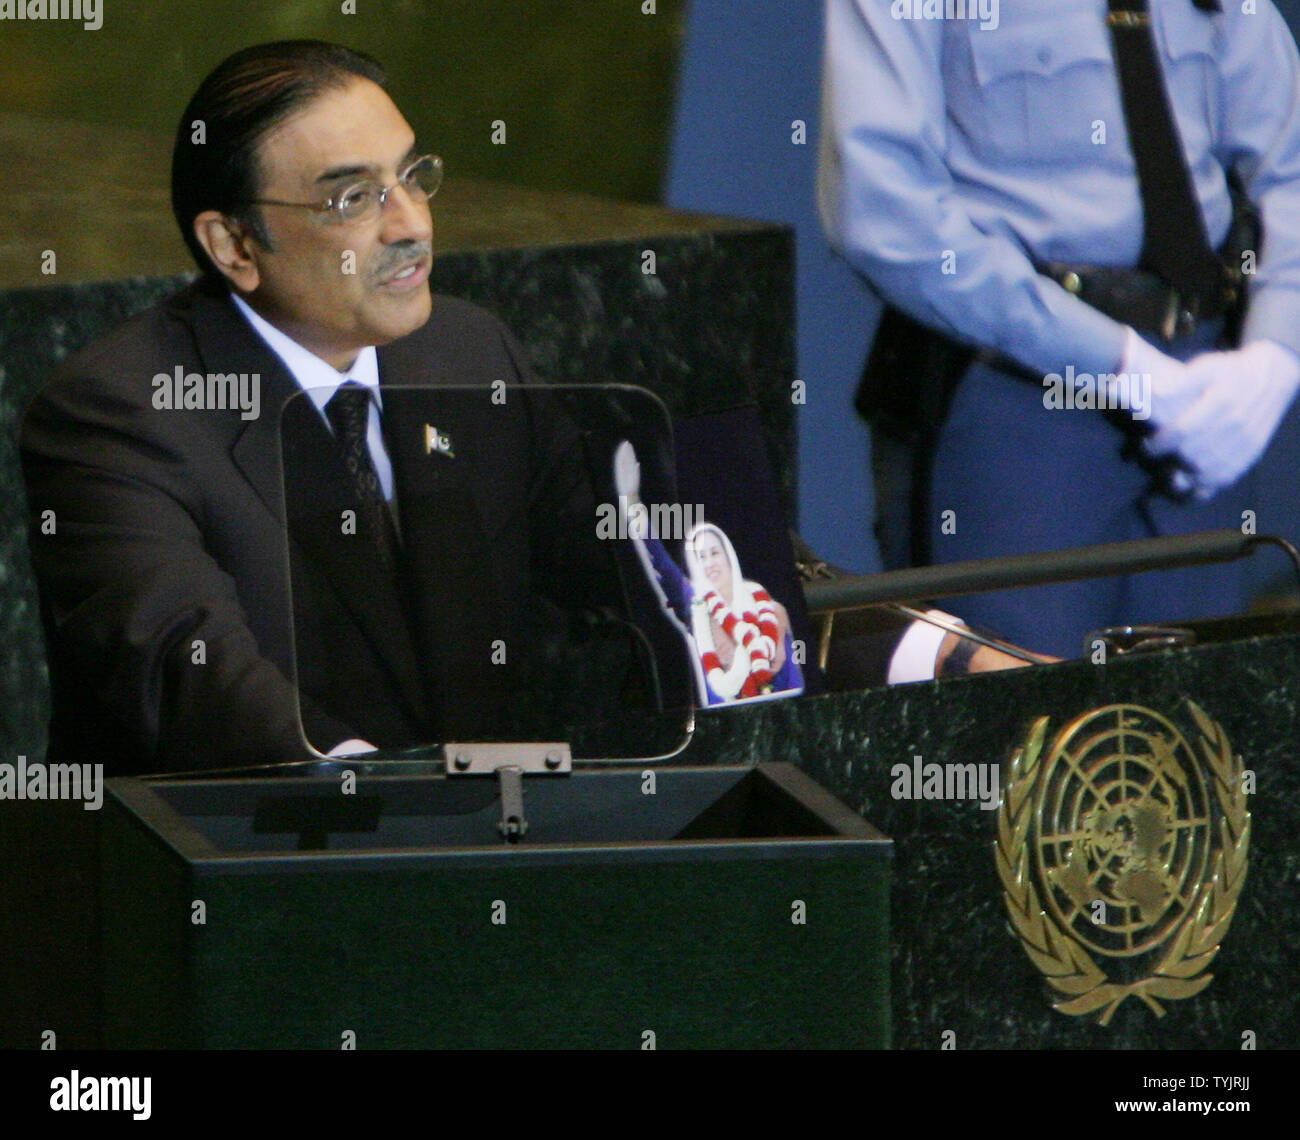 Asif Ali Zardari, President of Pakistan and husband of Benazir Bhutto, addresses the 63rd session of the General Assembly as he displays a photo of the assassinated political leader at the United Nations on September 25, 2008 in New York City. (UPI Photo/Monika Graff) Stock Photo